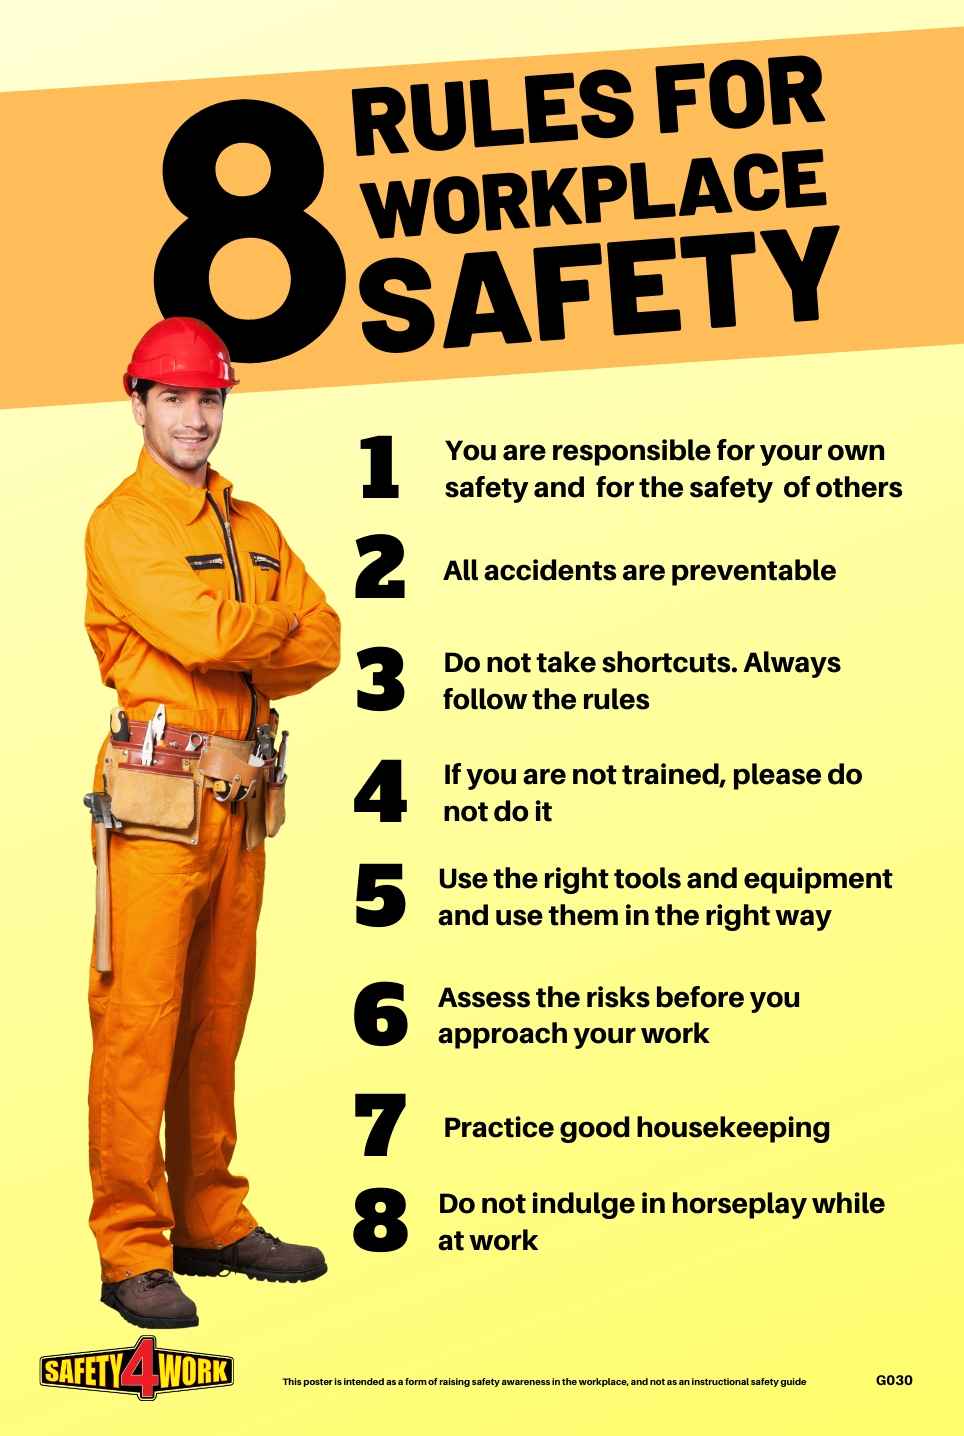 Related Image Workplace Safety Safety Posters Health And Safety Poster